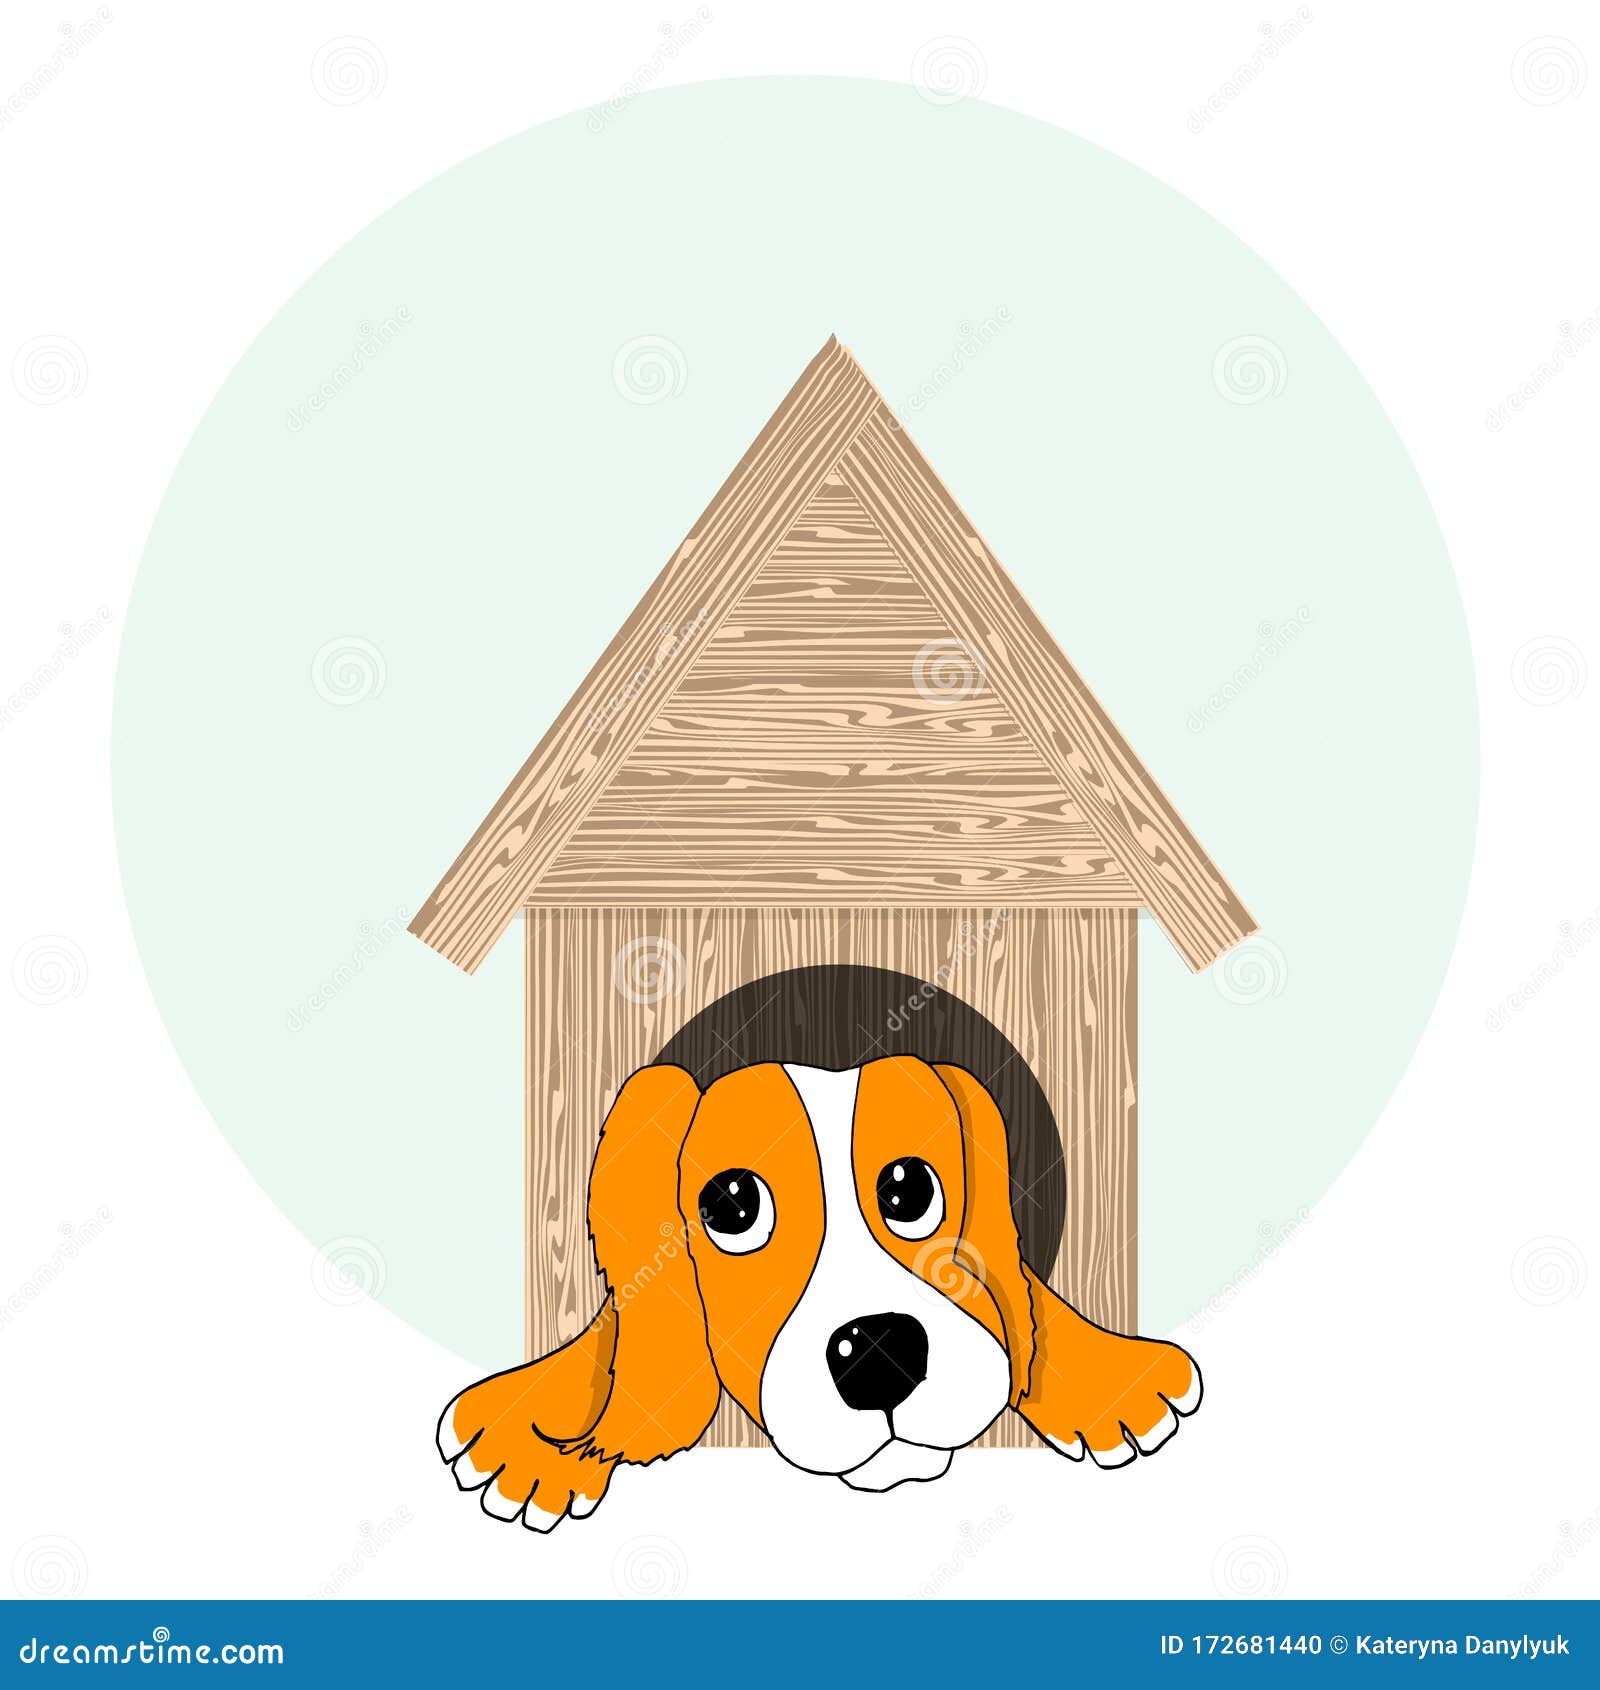 Sad Red Dog in a Wooden Booth. Cartoons Pet Animal Art Design Stock Vector  Illustration Stock Vector - Illustration of animal, print: 172681440